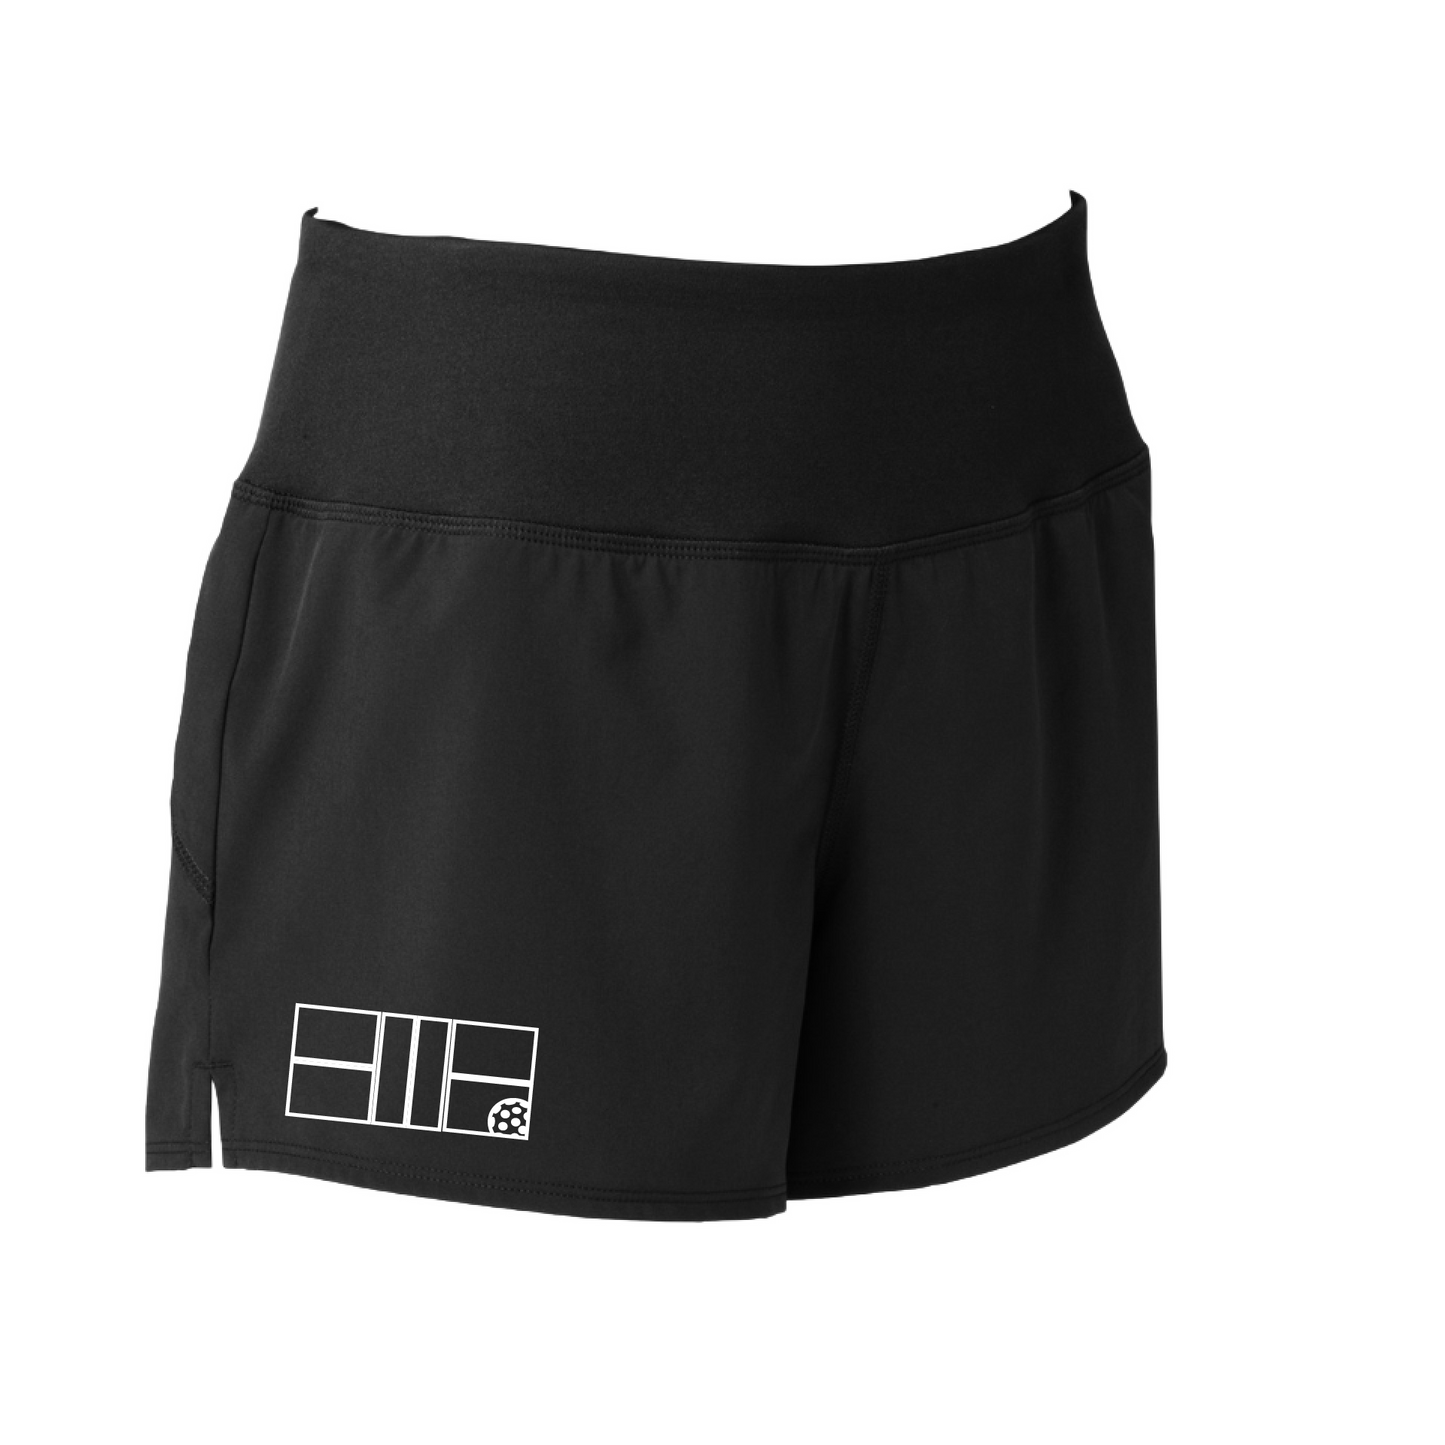 Pickleball Designs: Pickleball Court with Pickleball  Sport Tek women’s repeat shorts come with built-in cell phone pocket on the exterior of the waistband. You can also feel secure knowing that no matter how strenuous the exercise, the shorts will remain in place (it won’t ride up!). These shorts are extremely versatile and trendy. Transition from the Pickleball court to running errands smoothly.